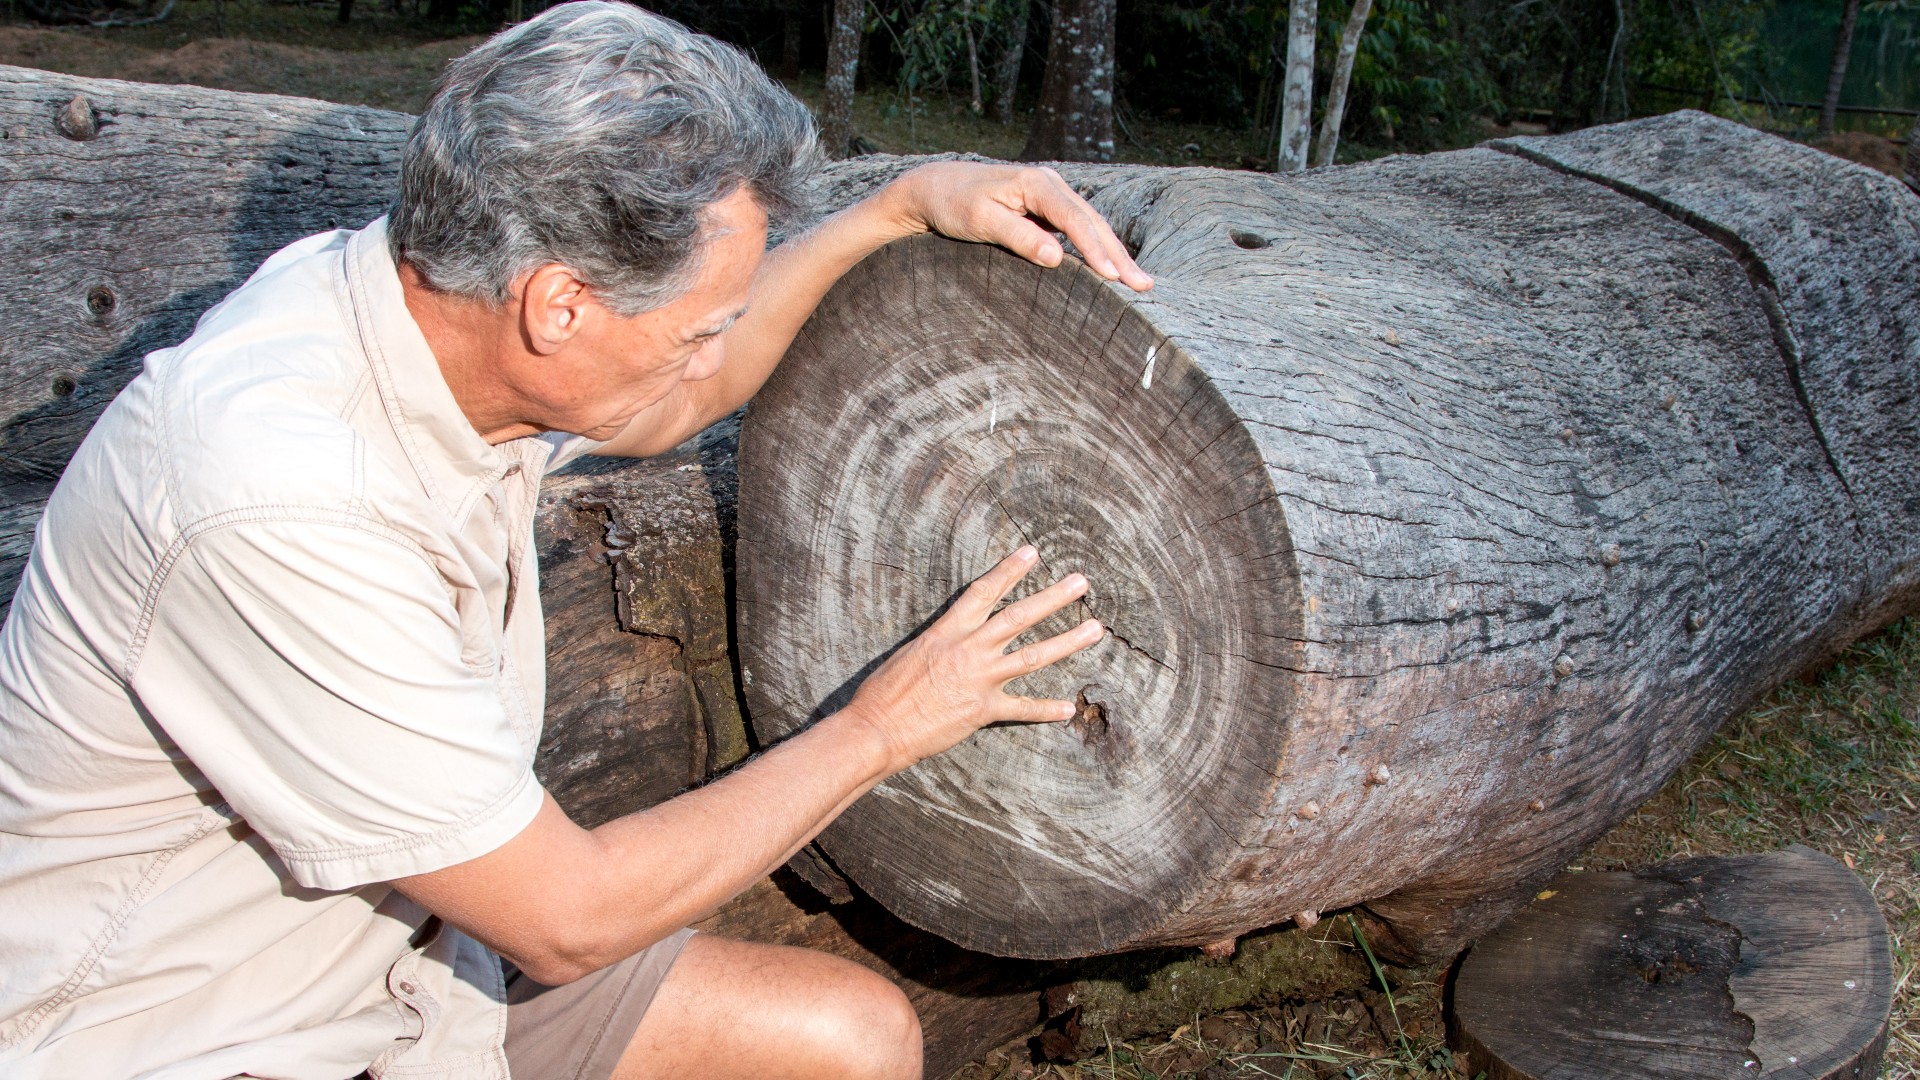 Here we see a man inspecting the rings on a tree that was cut down to find out how old the tree is.